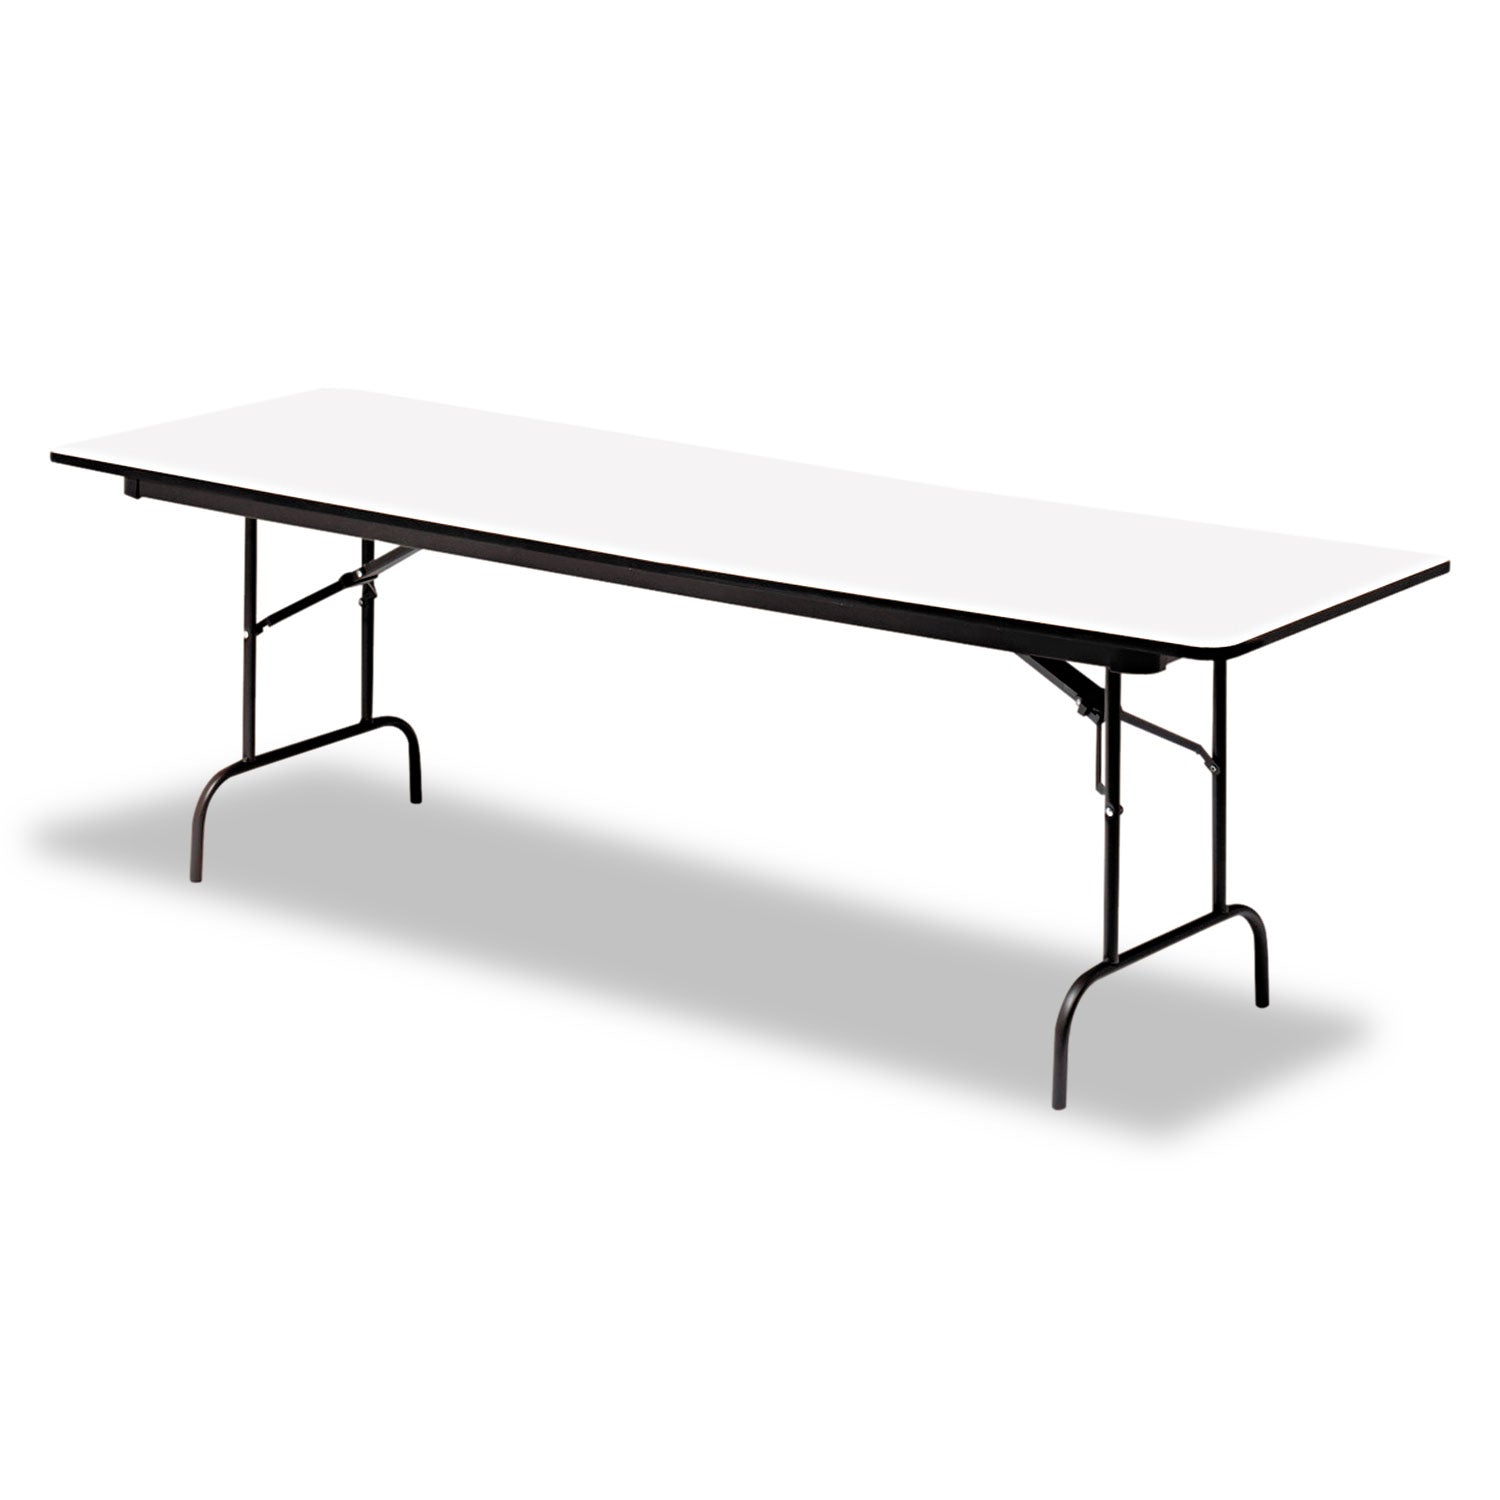 OfficeWorks Commercial Wood-Laminate Folding Table, Rectangular, 60" x 30" x 29", Gray/Charcoal - 